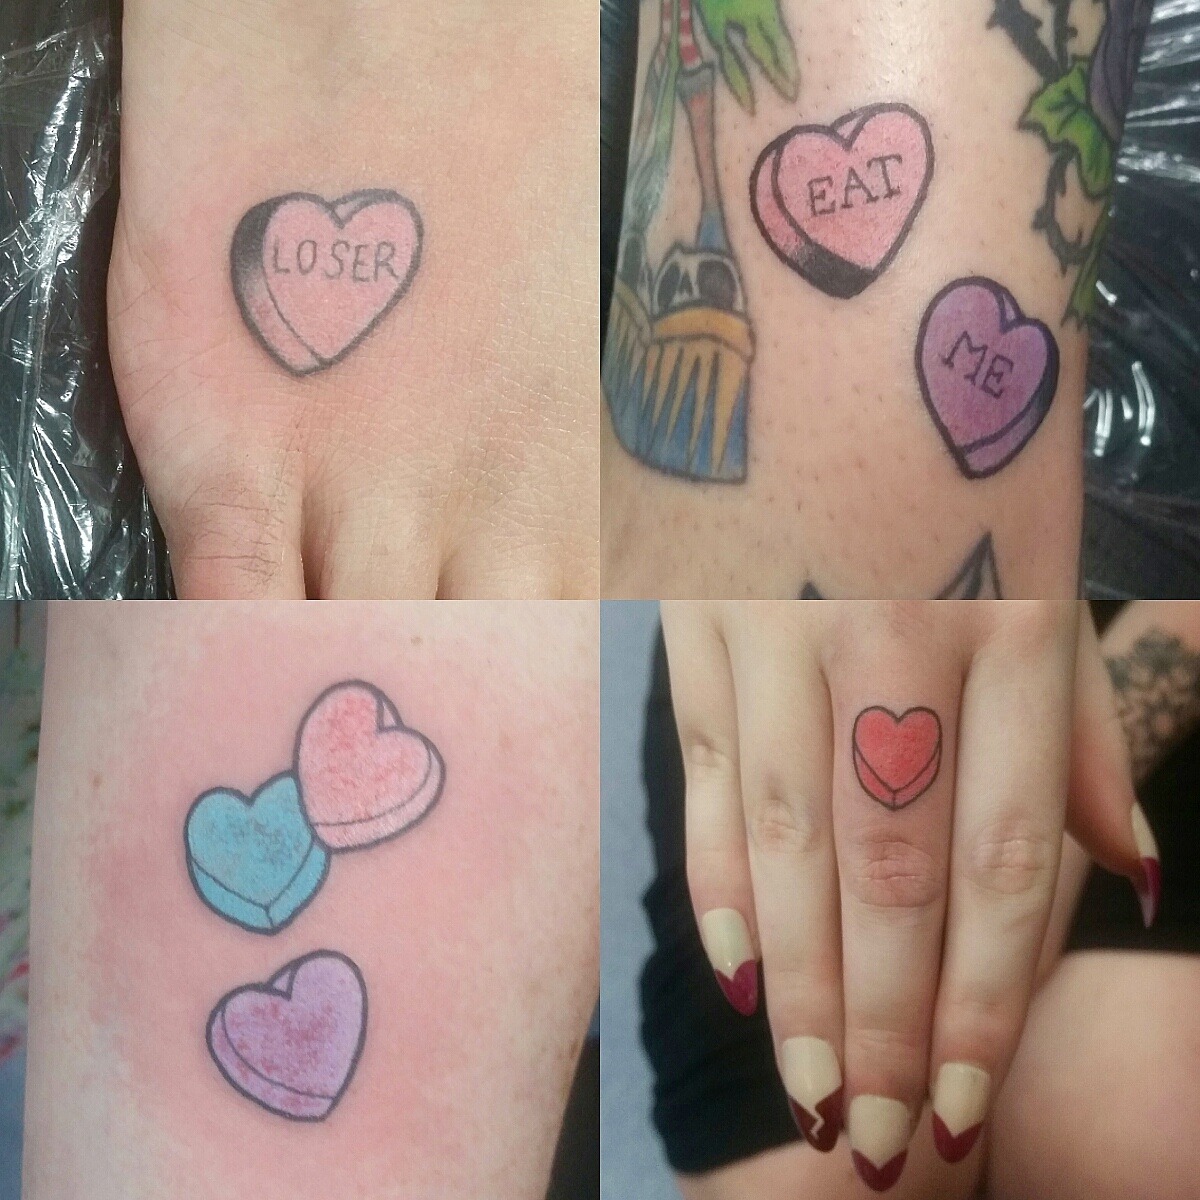 Delicious Candy Tattoos For Folks With A Sweet Tooth  Tattoodo